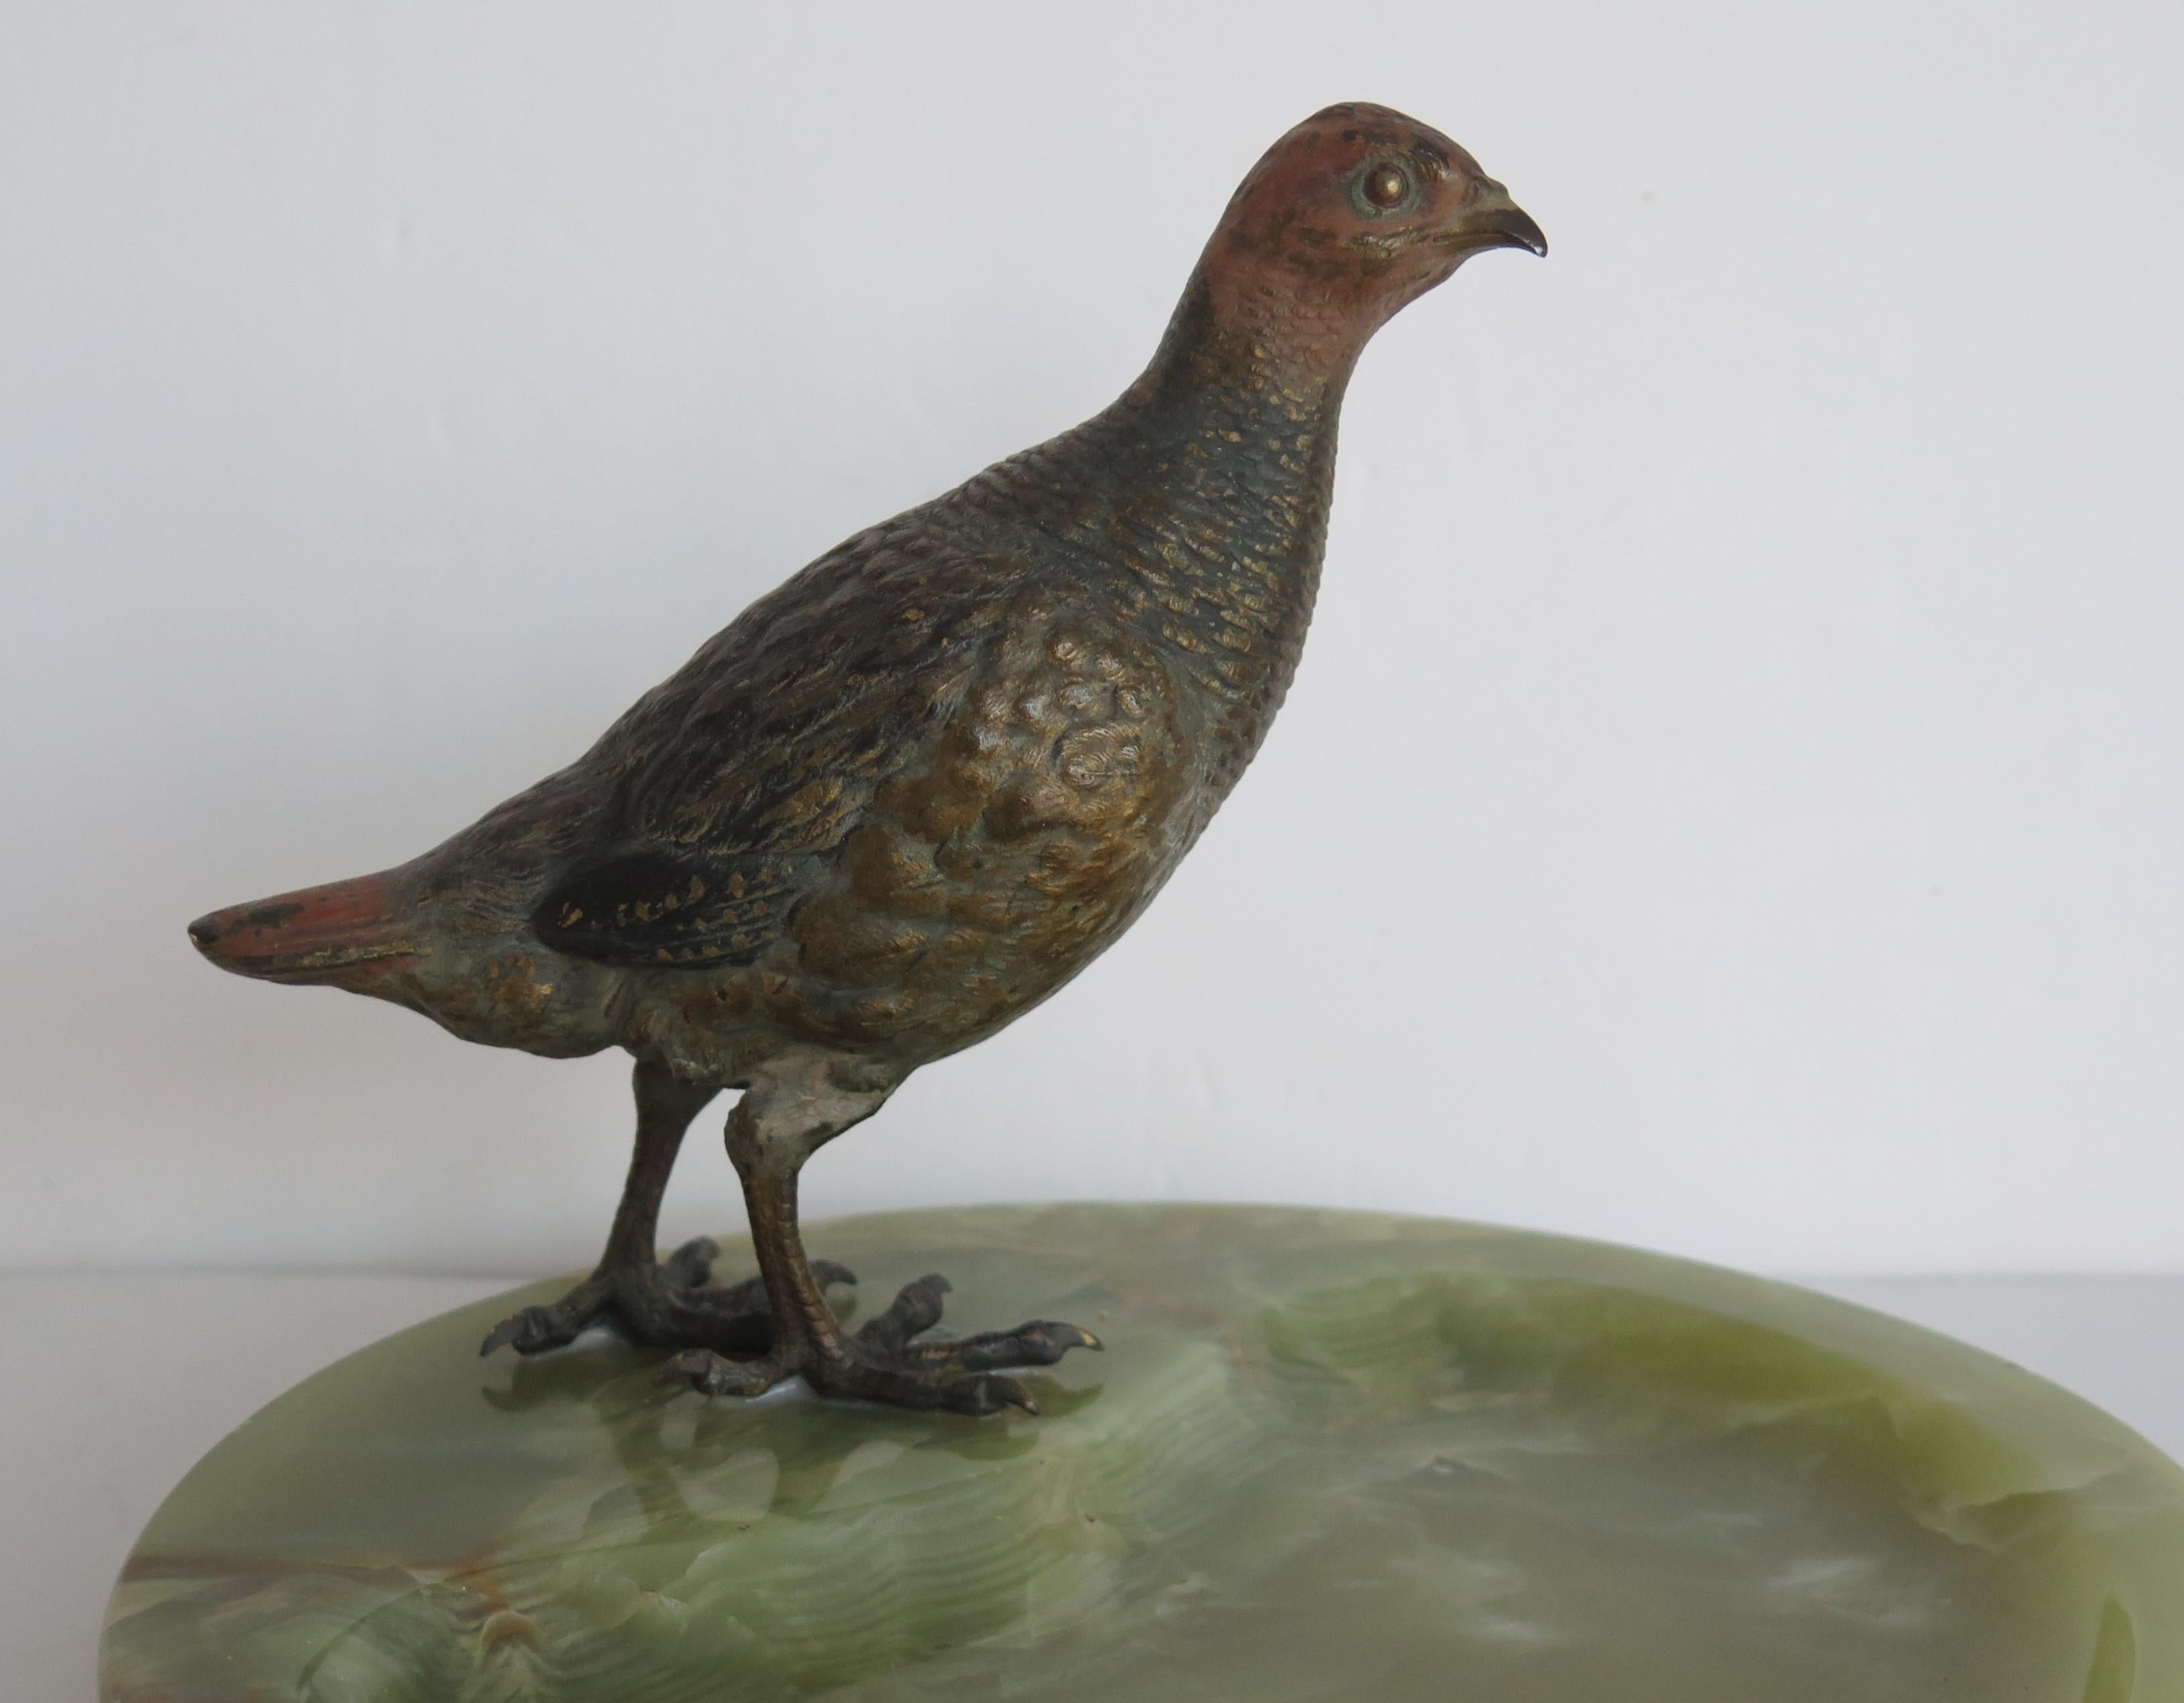 This is a very good bronze sculpture of a Grey Partridge, stood on an Onyx stone tray base, all dating to the Art Deco period, Circa 1930.

The bronze Partridge is very well modelled with good quality cold hand painted detail, that has not been